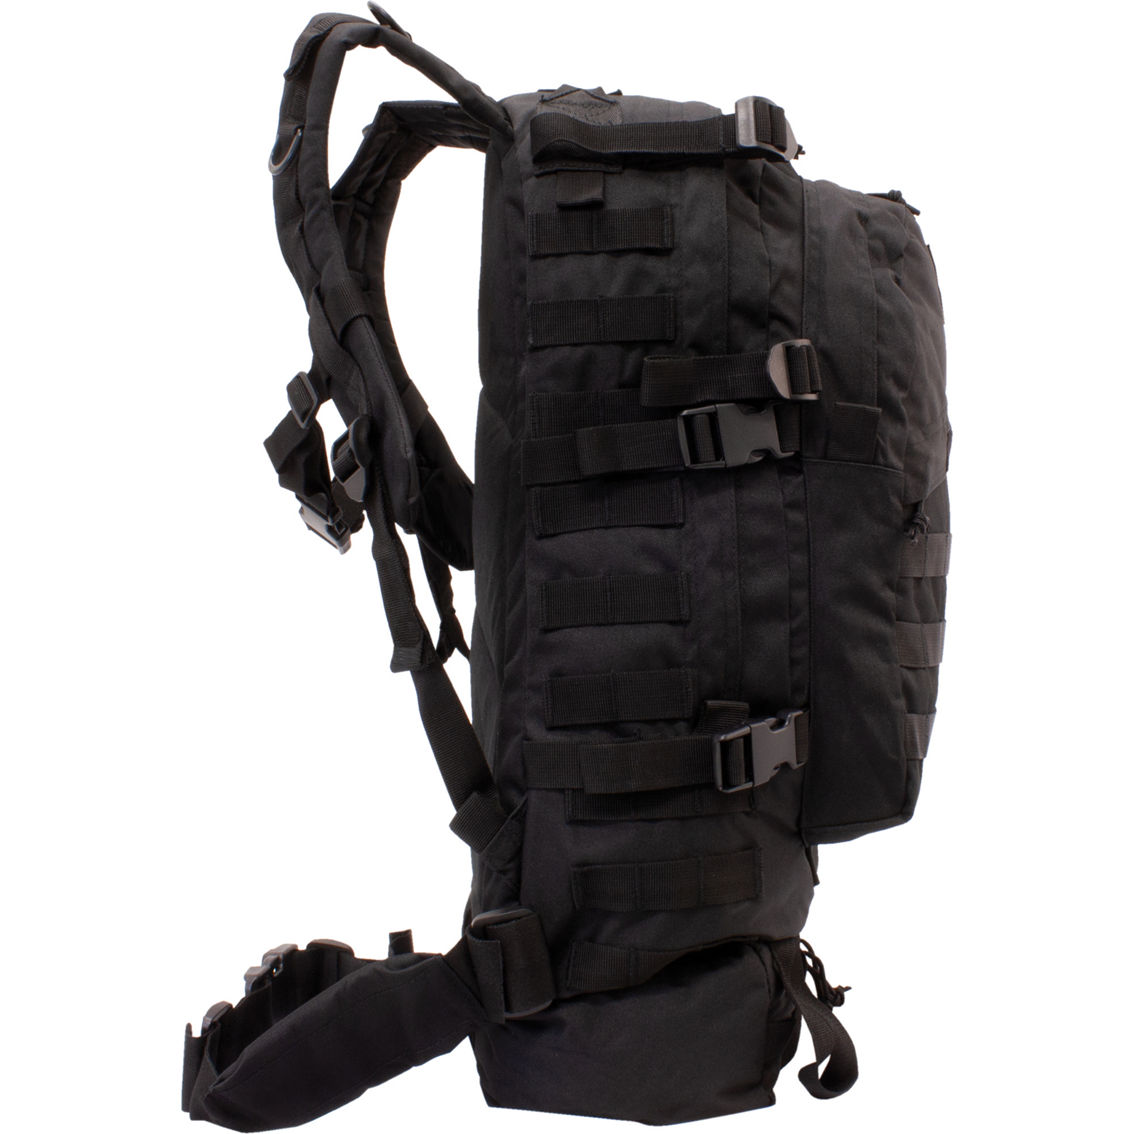 Red Rock Outdoor Gear Engagement Pack - Image 4 of 6